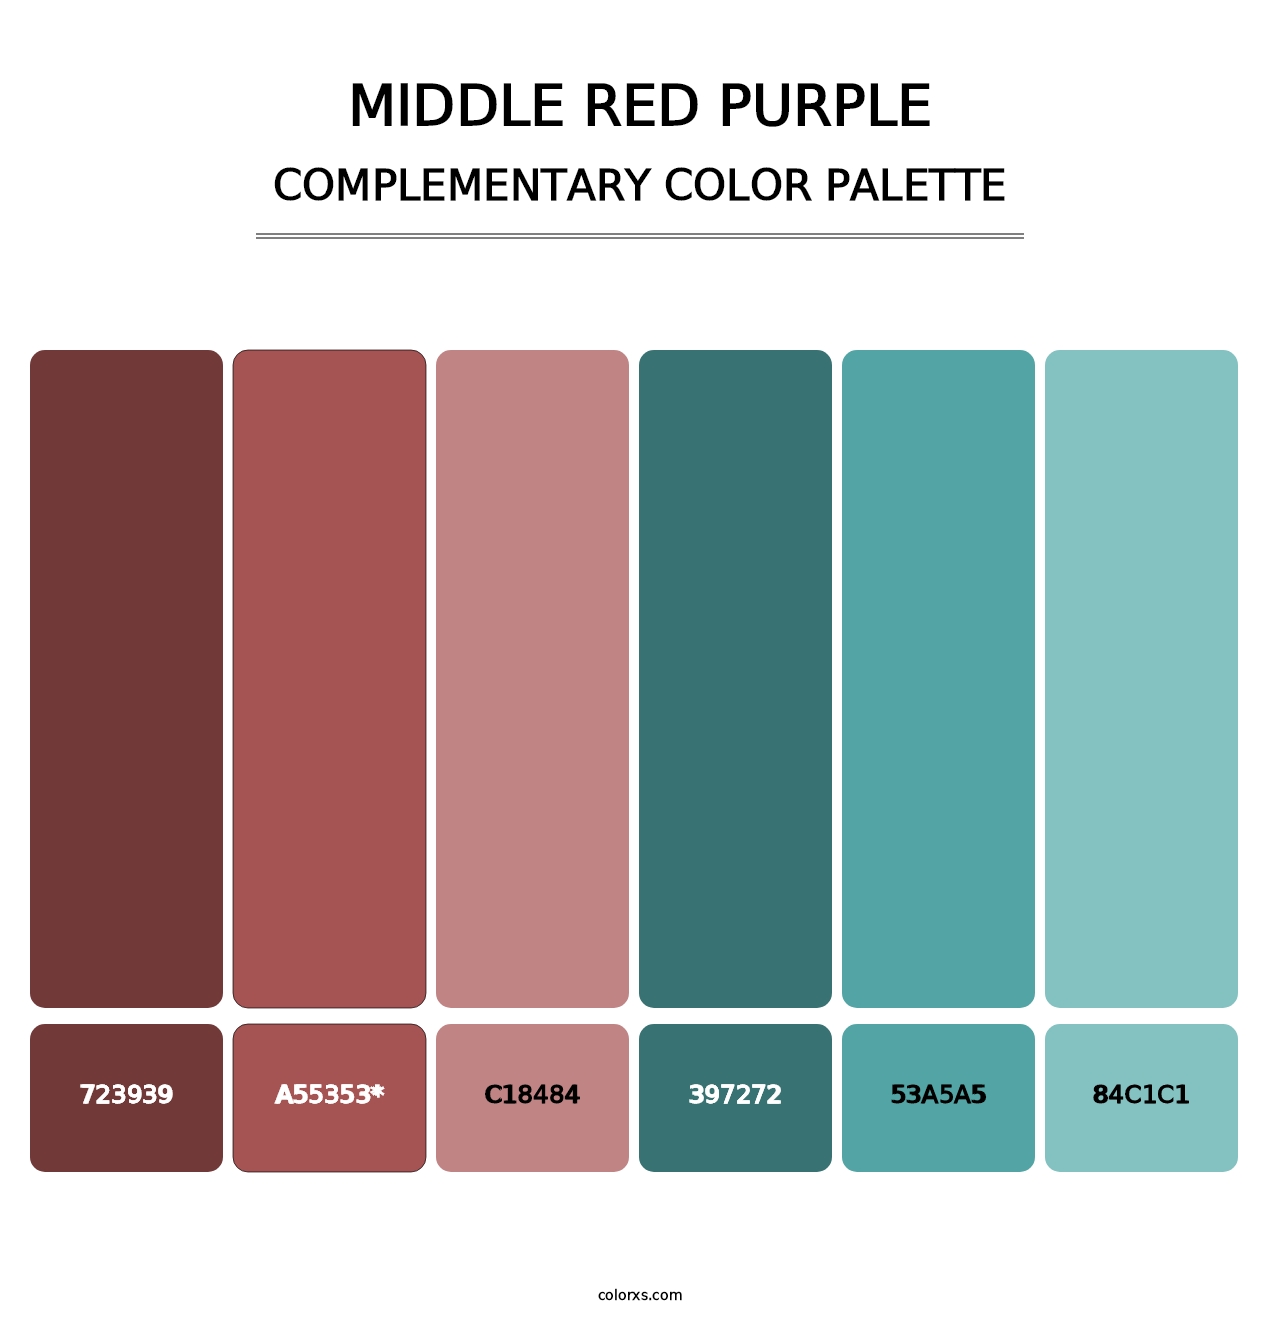 Middle Red Purple - Complementary Color Palette